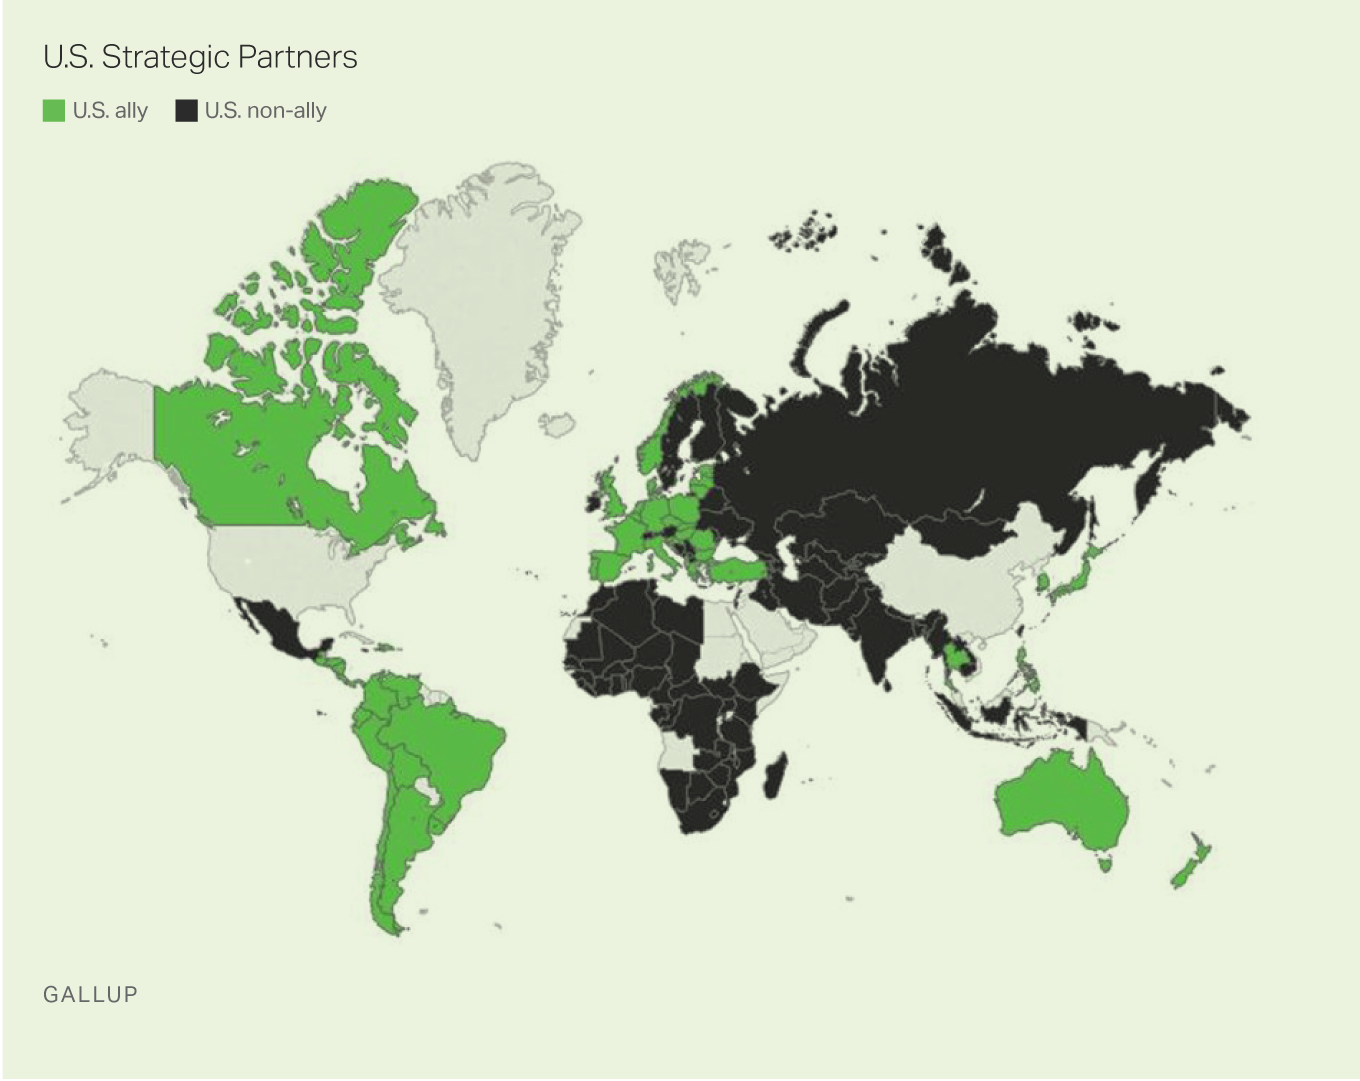 Map of Nations by U.S. Strategic Partner Status